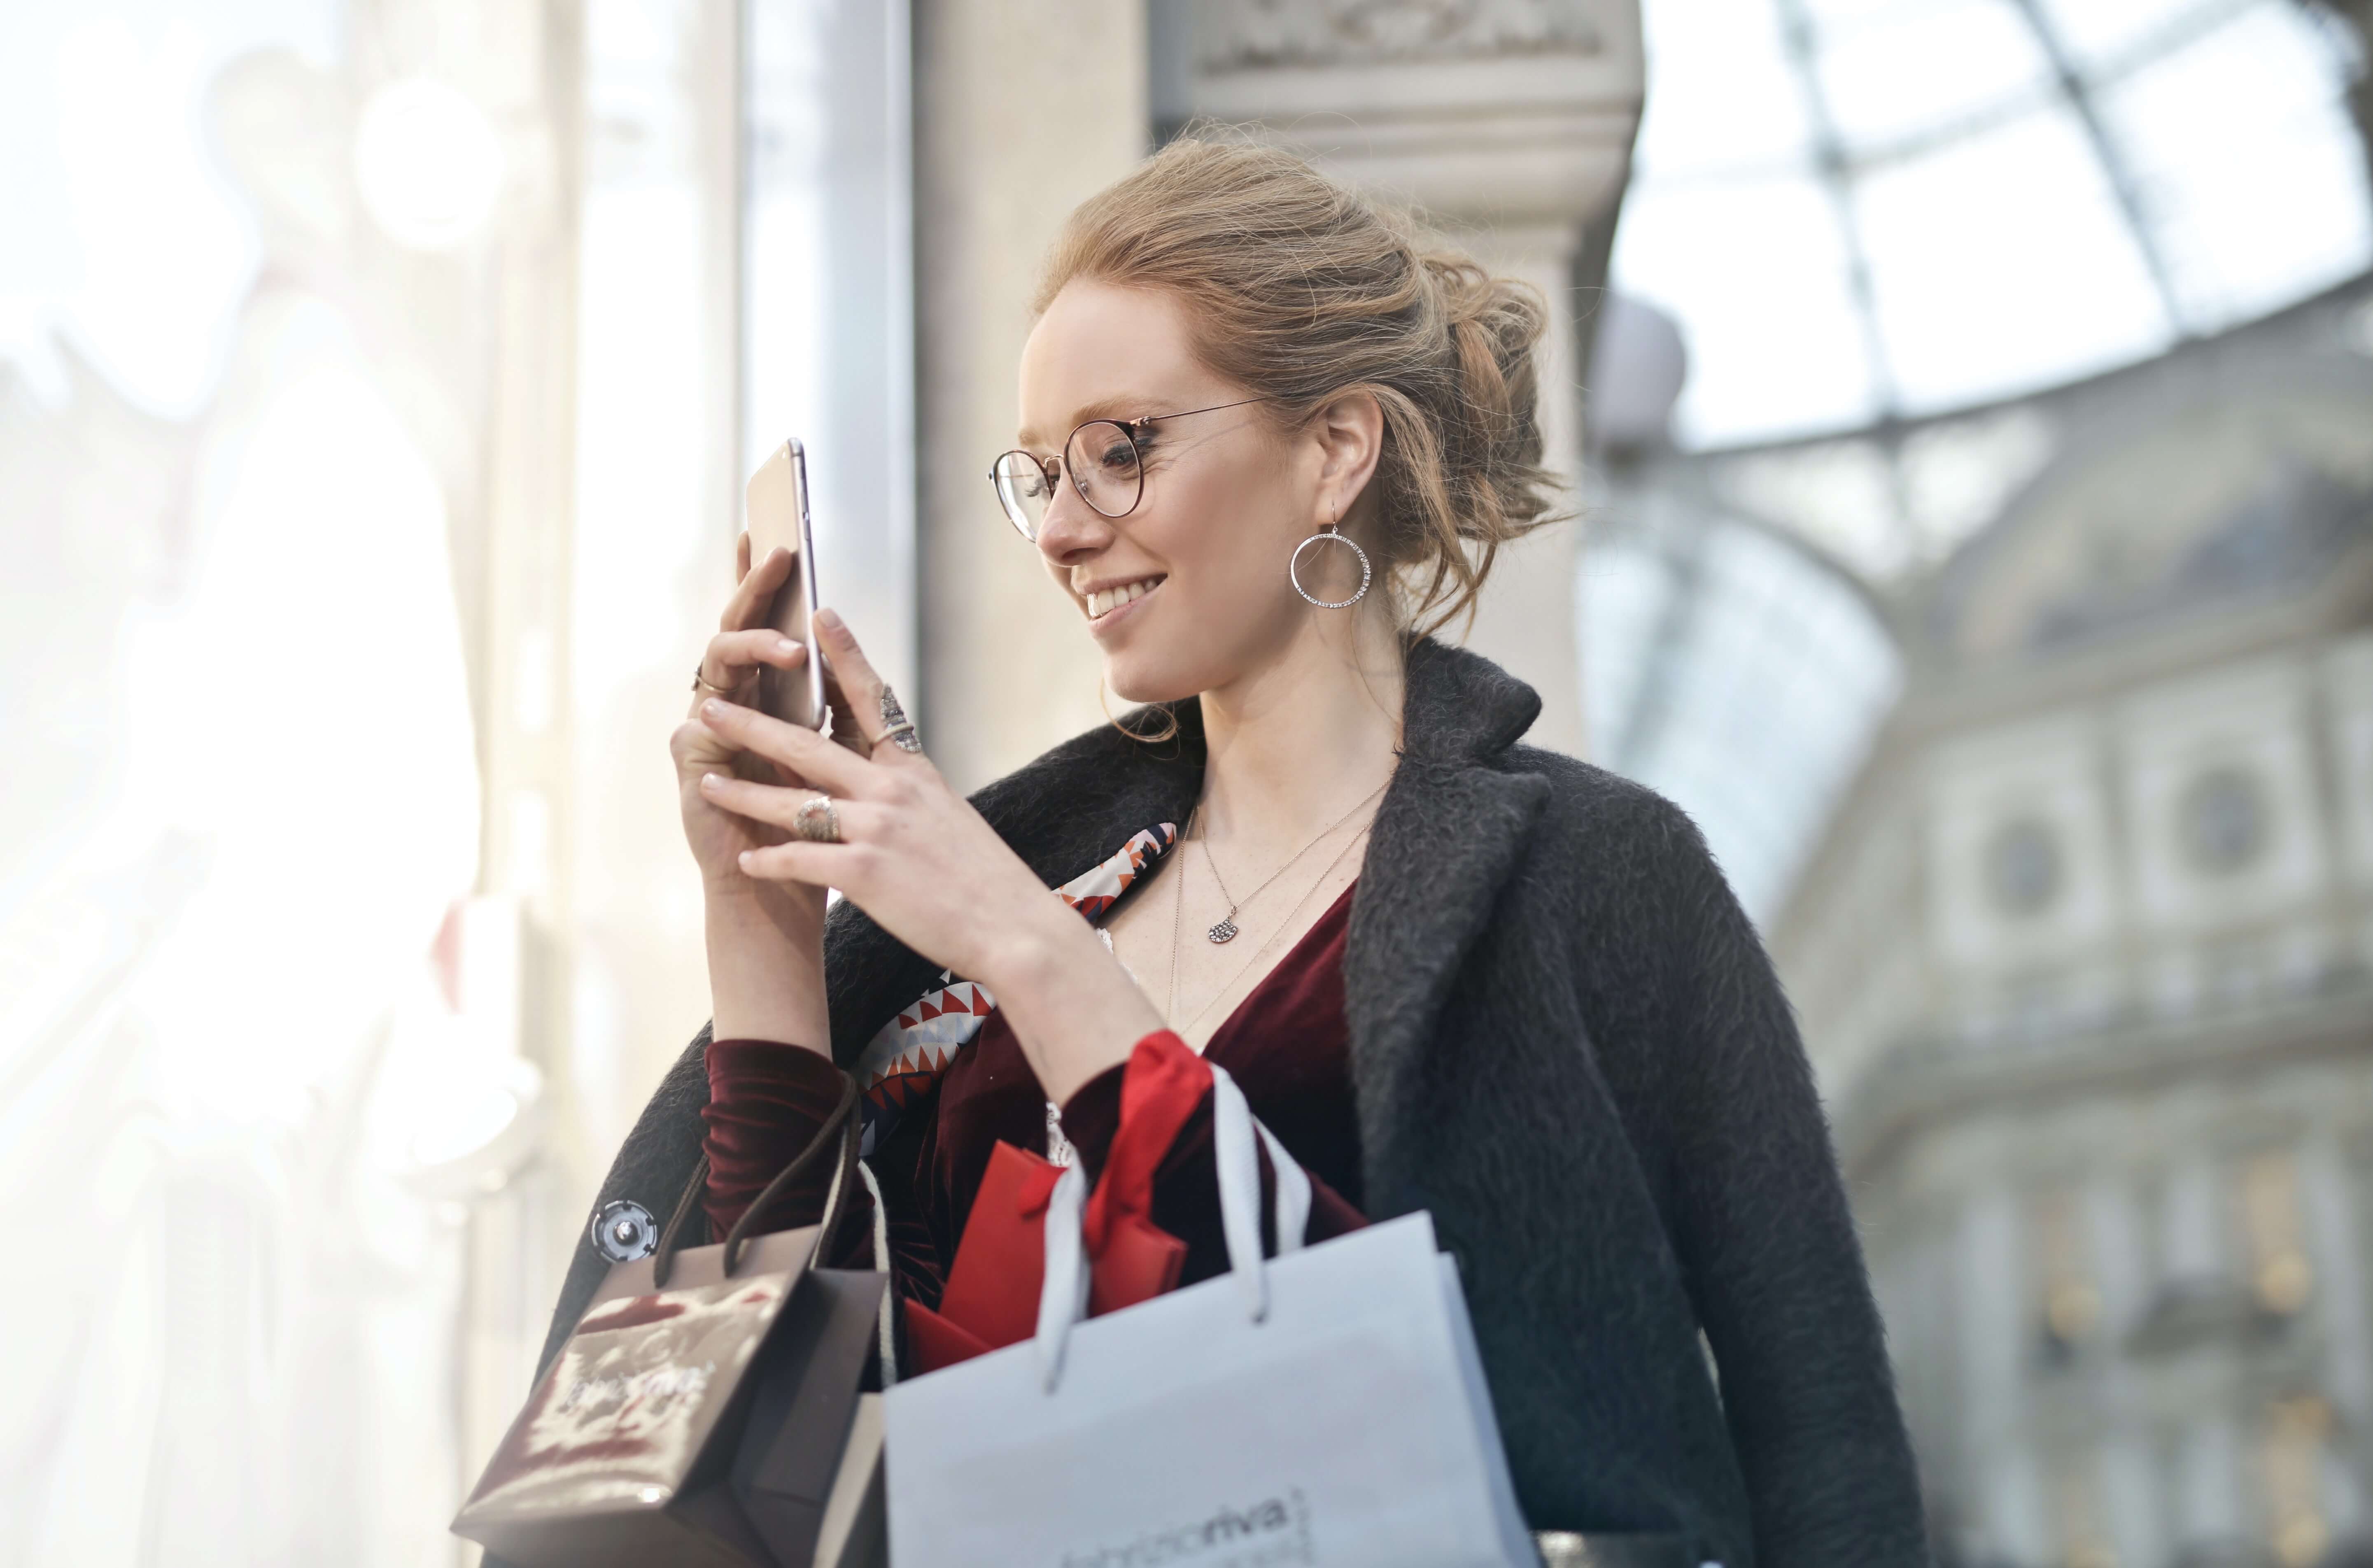 Redheaded shopper smiling at retail SMS message with helpful marketing content